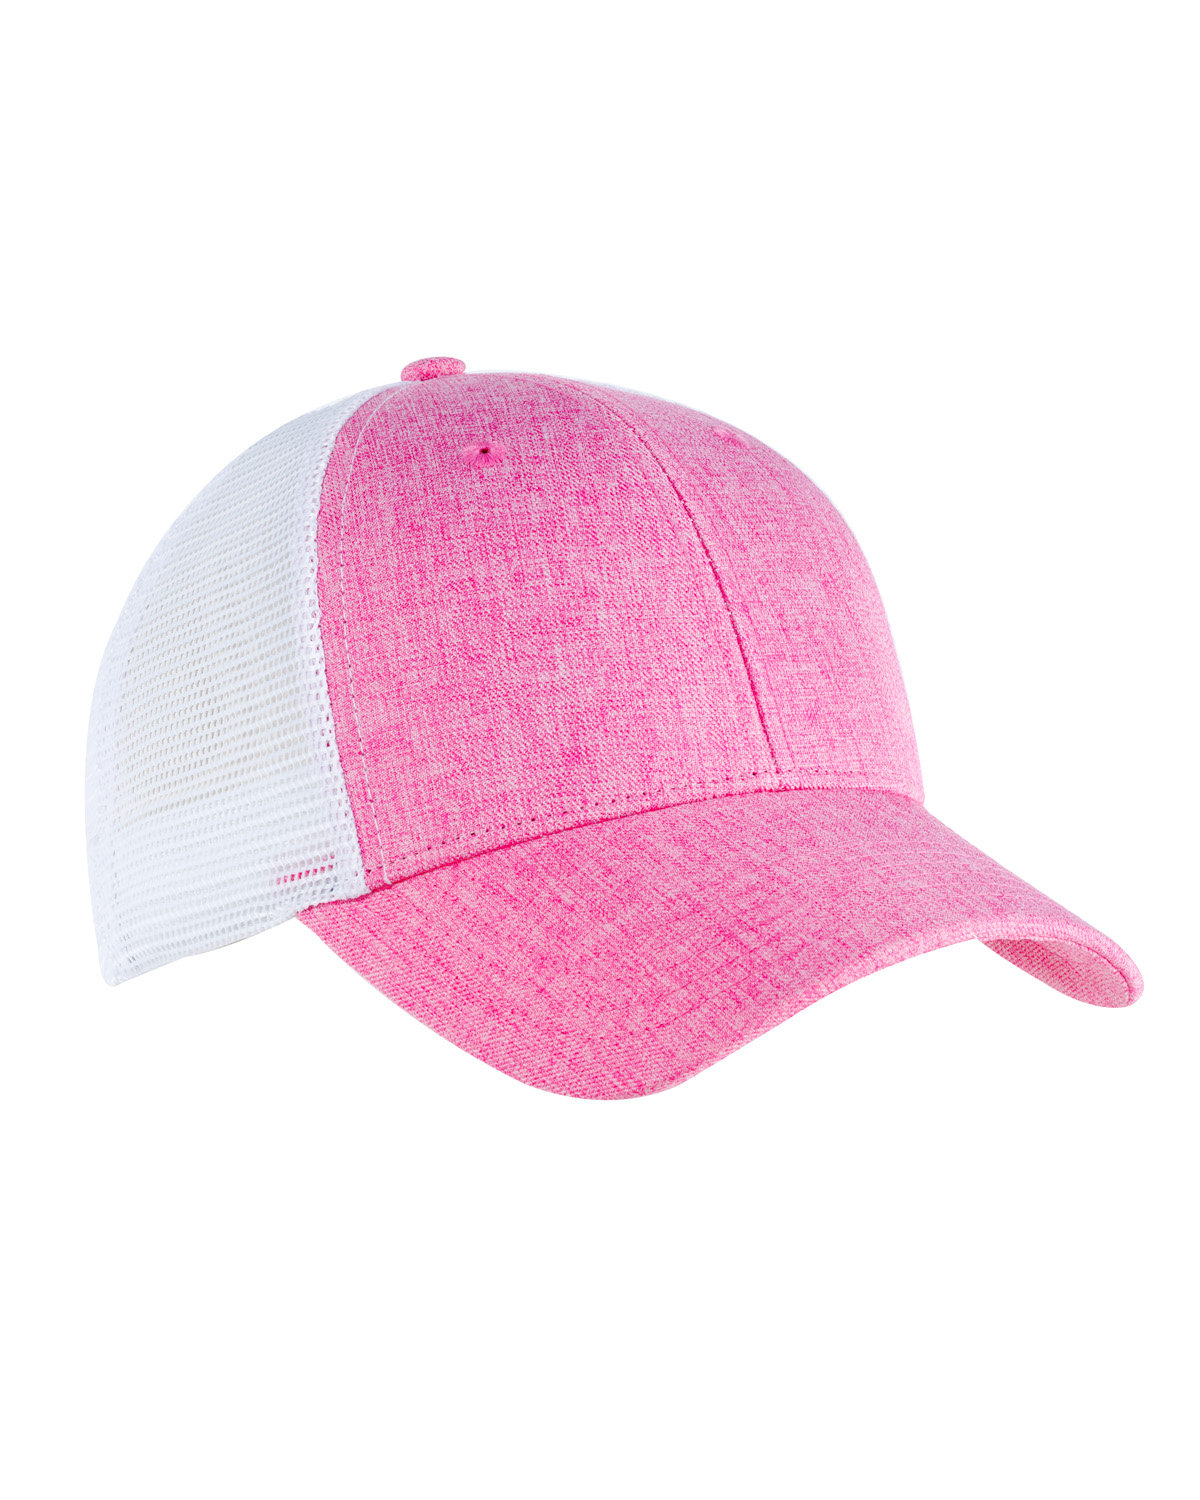 click to view Hthr Pink/ Wht